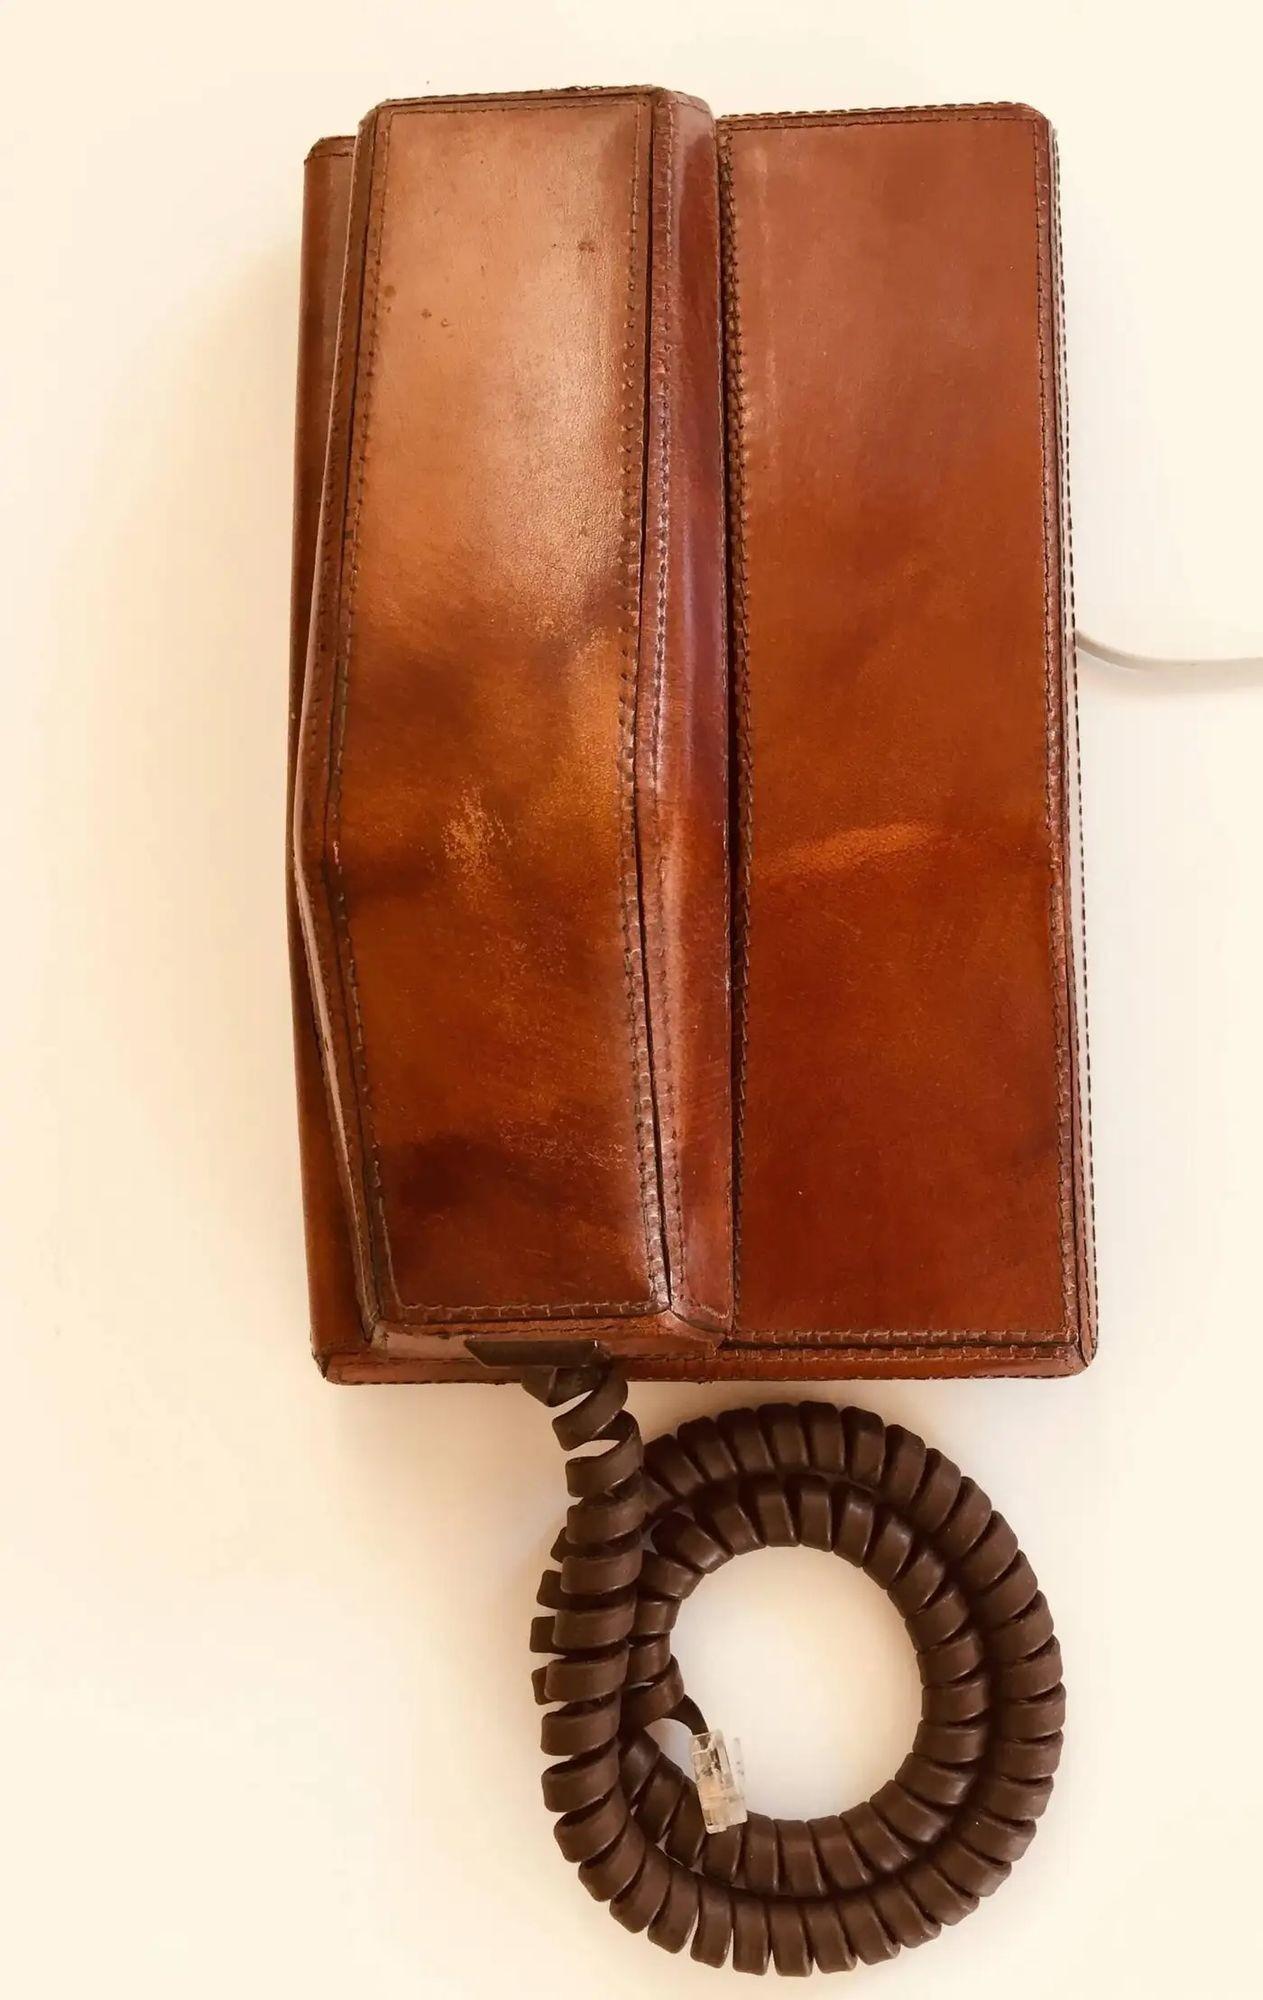 Vintage Brown Leather Covered and Hand-Stitched Telephone by Contempra, 1970s For Sale 7